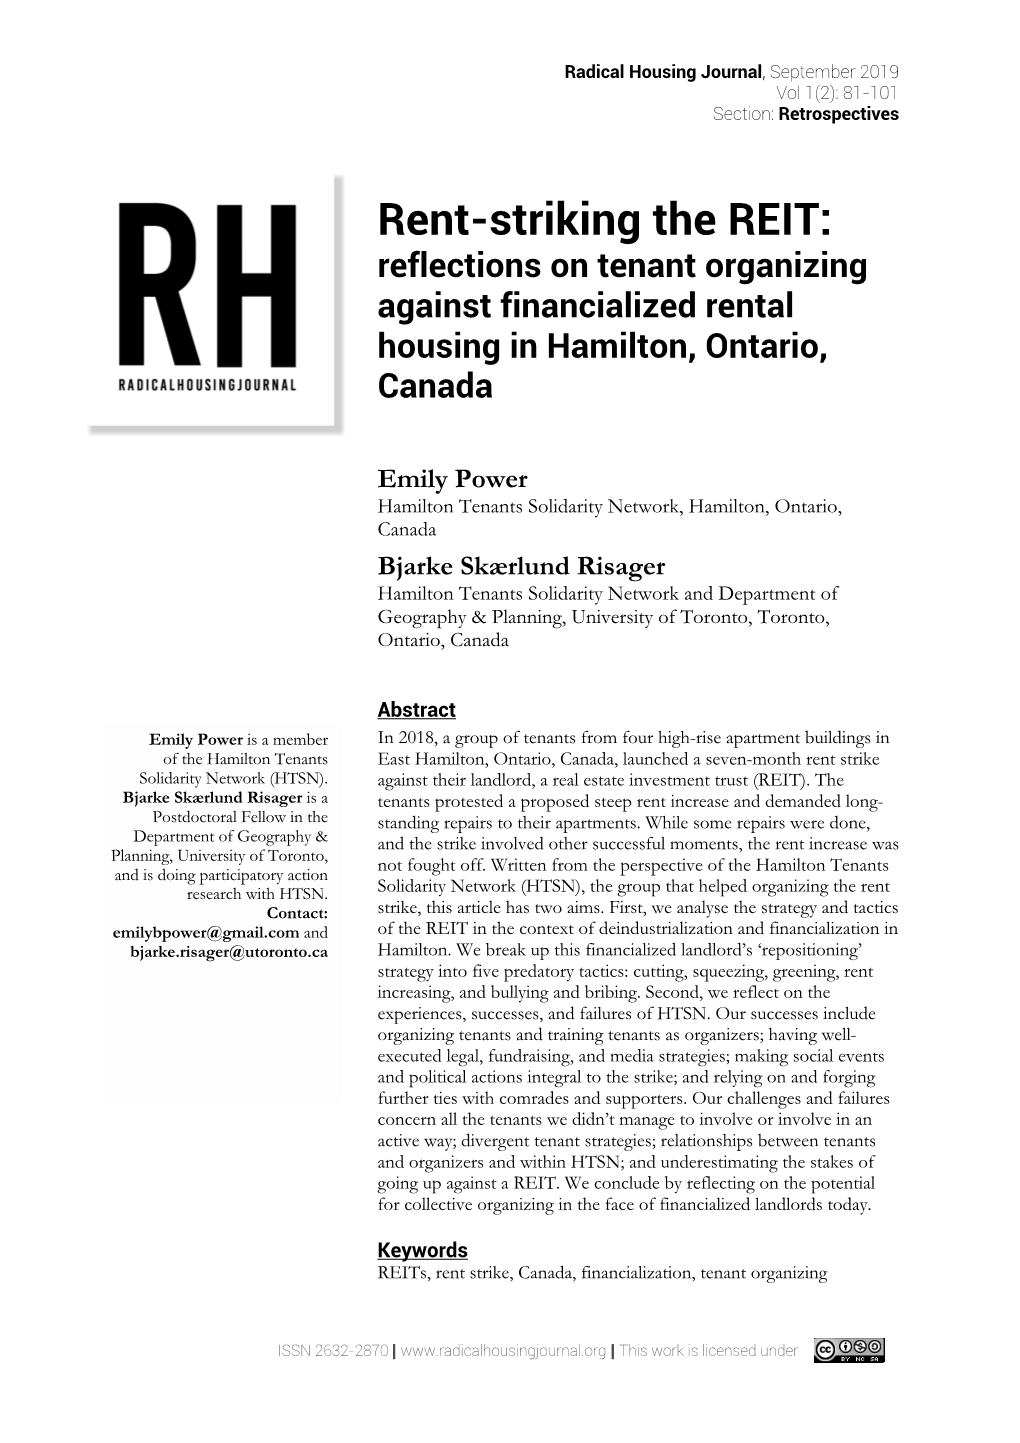 Rent-Striking the REIT: Reflections on Tenant Organizing Against Financialized Rental Housing in Hamilton, Ontario, Canada